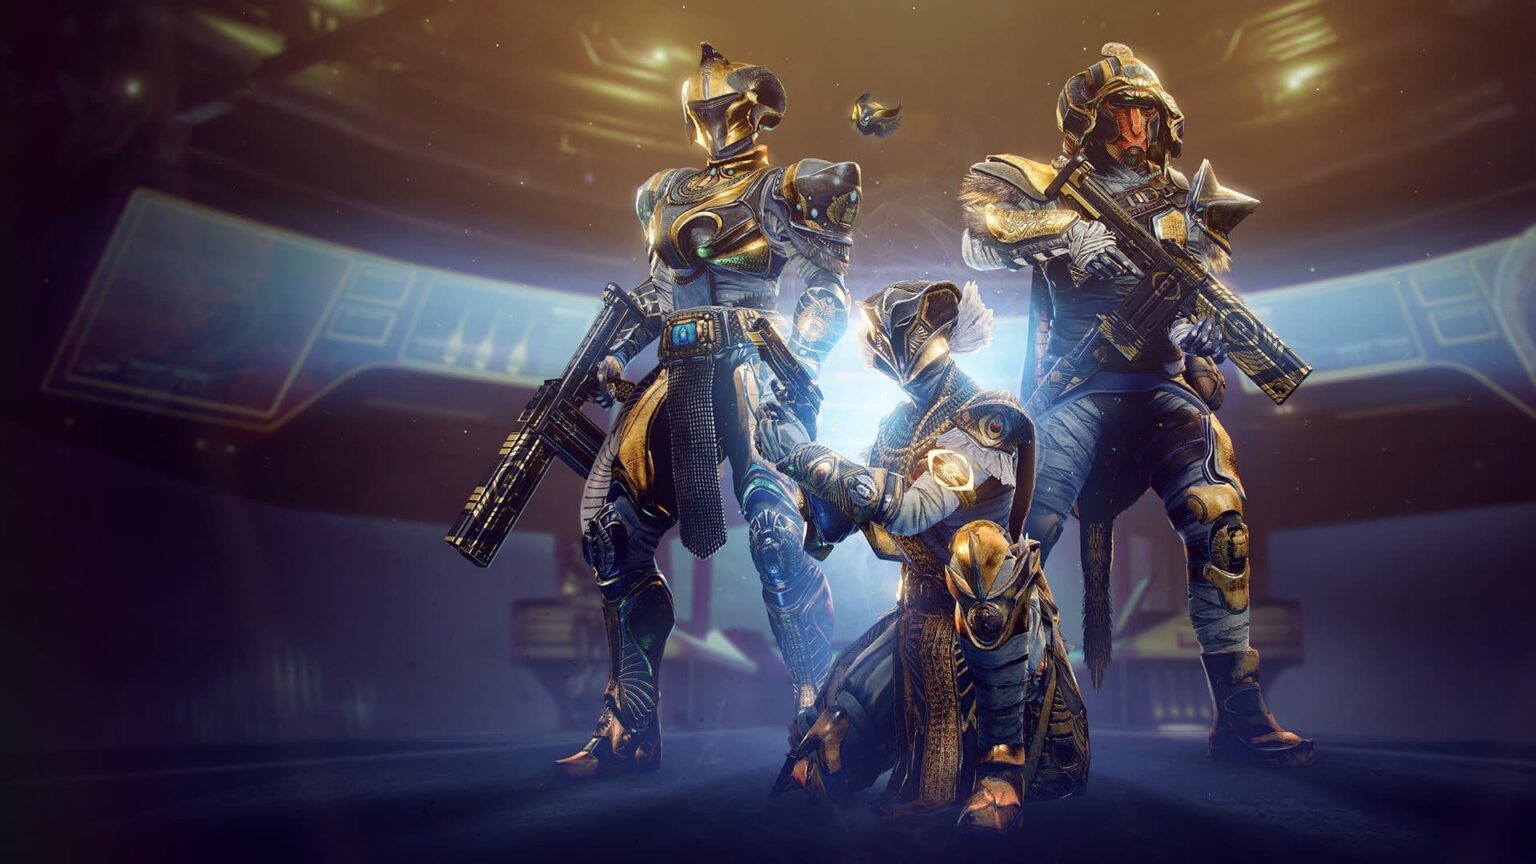 Trial Osiris is a game event in multiplayer shooter 'Destiny', which appeared in part 2. Challenges open every Friday, an opportunity to get rare items.